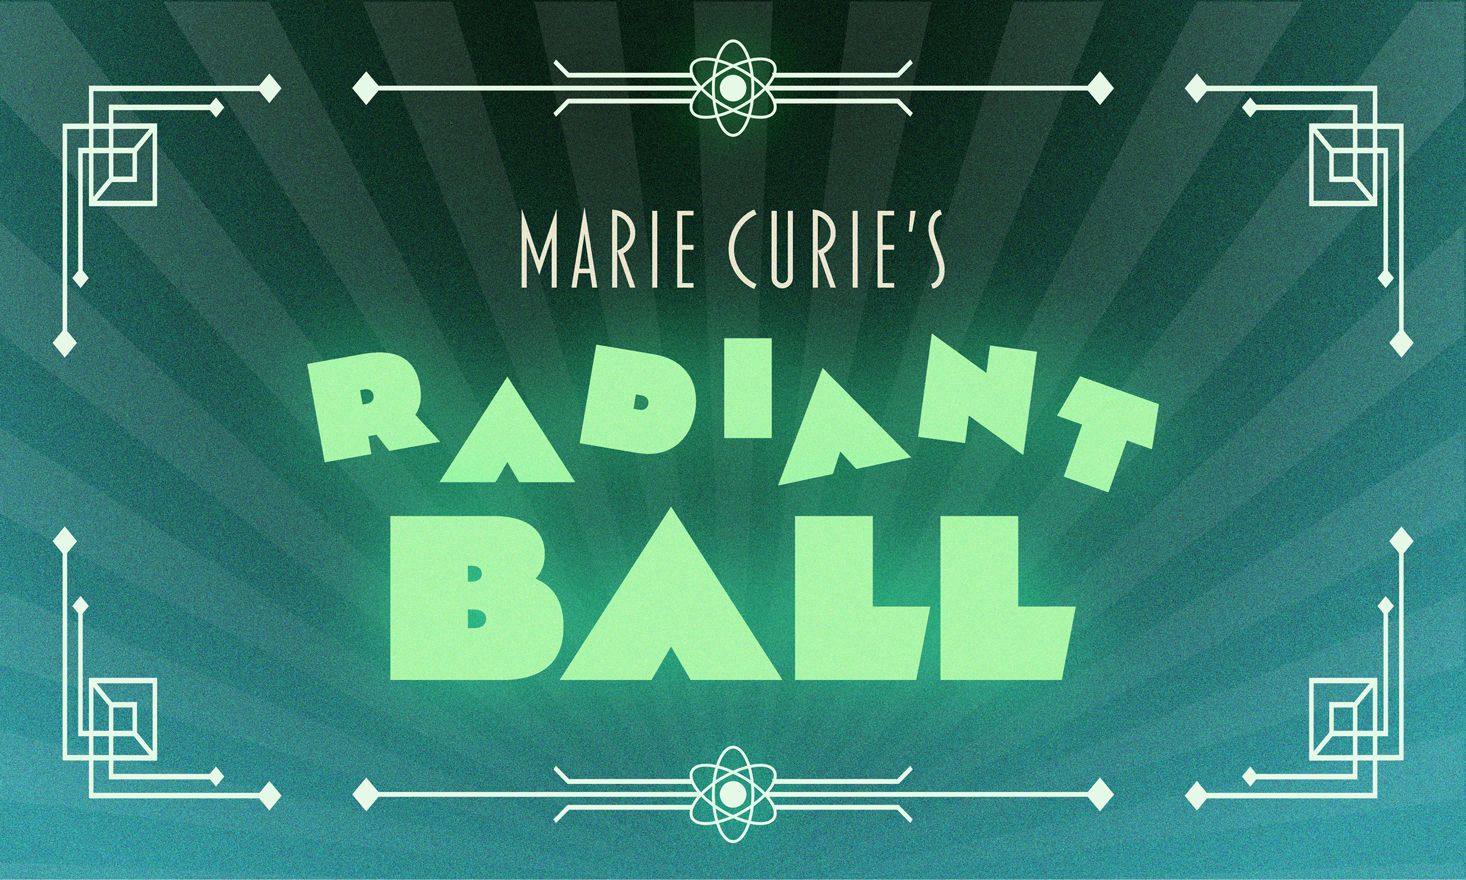 Dark striped background with green letters reading "Marie Curie's Radiant Ball"